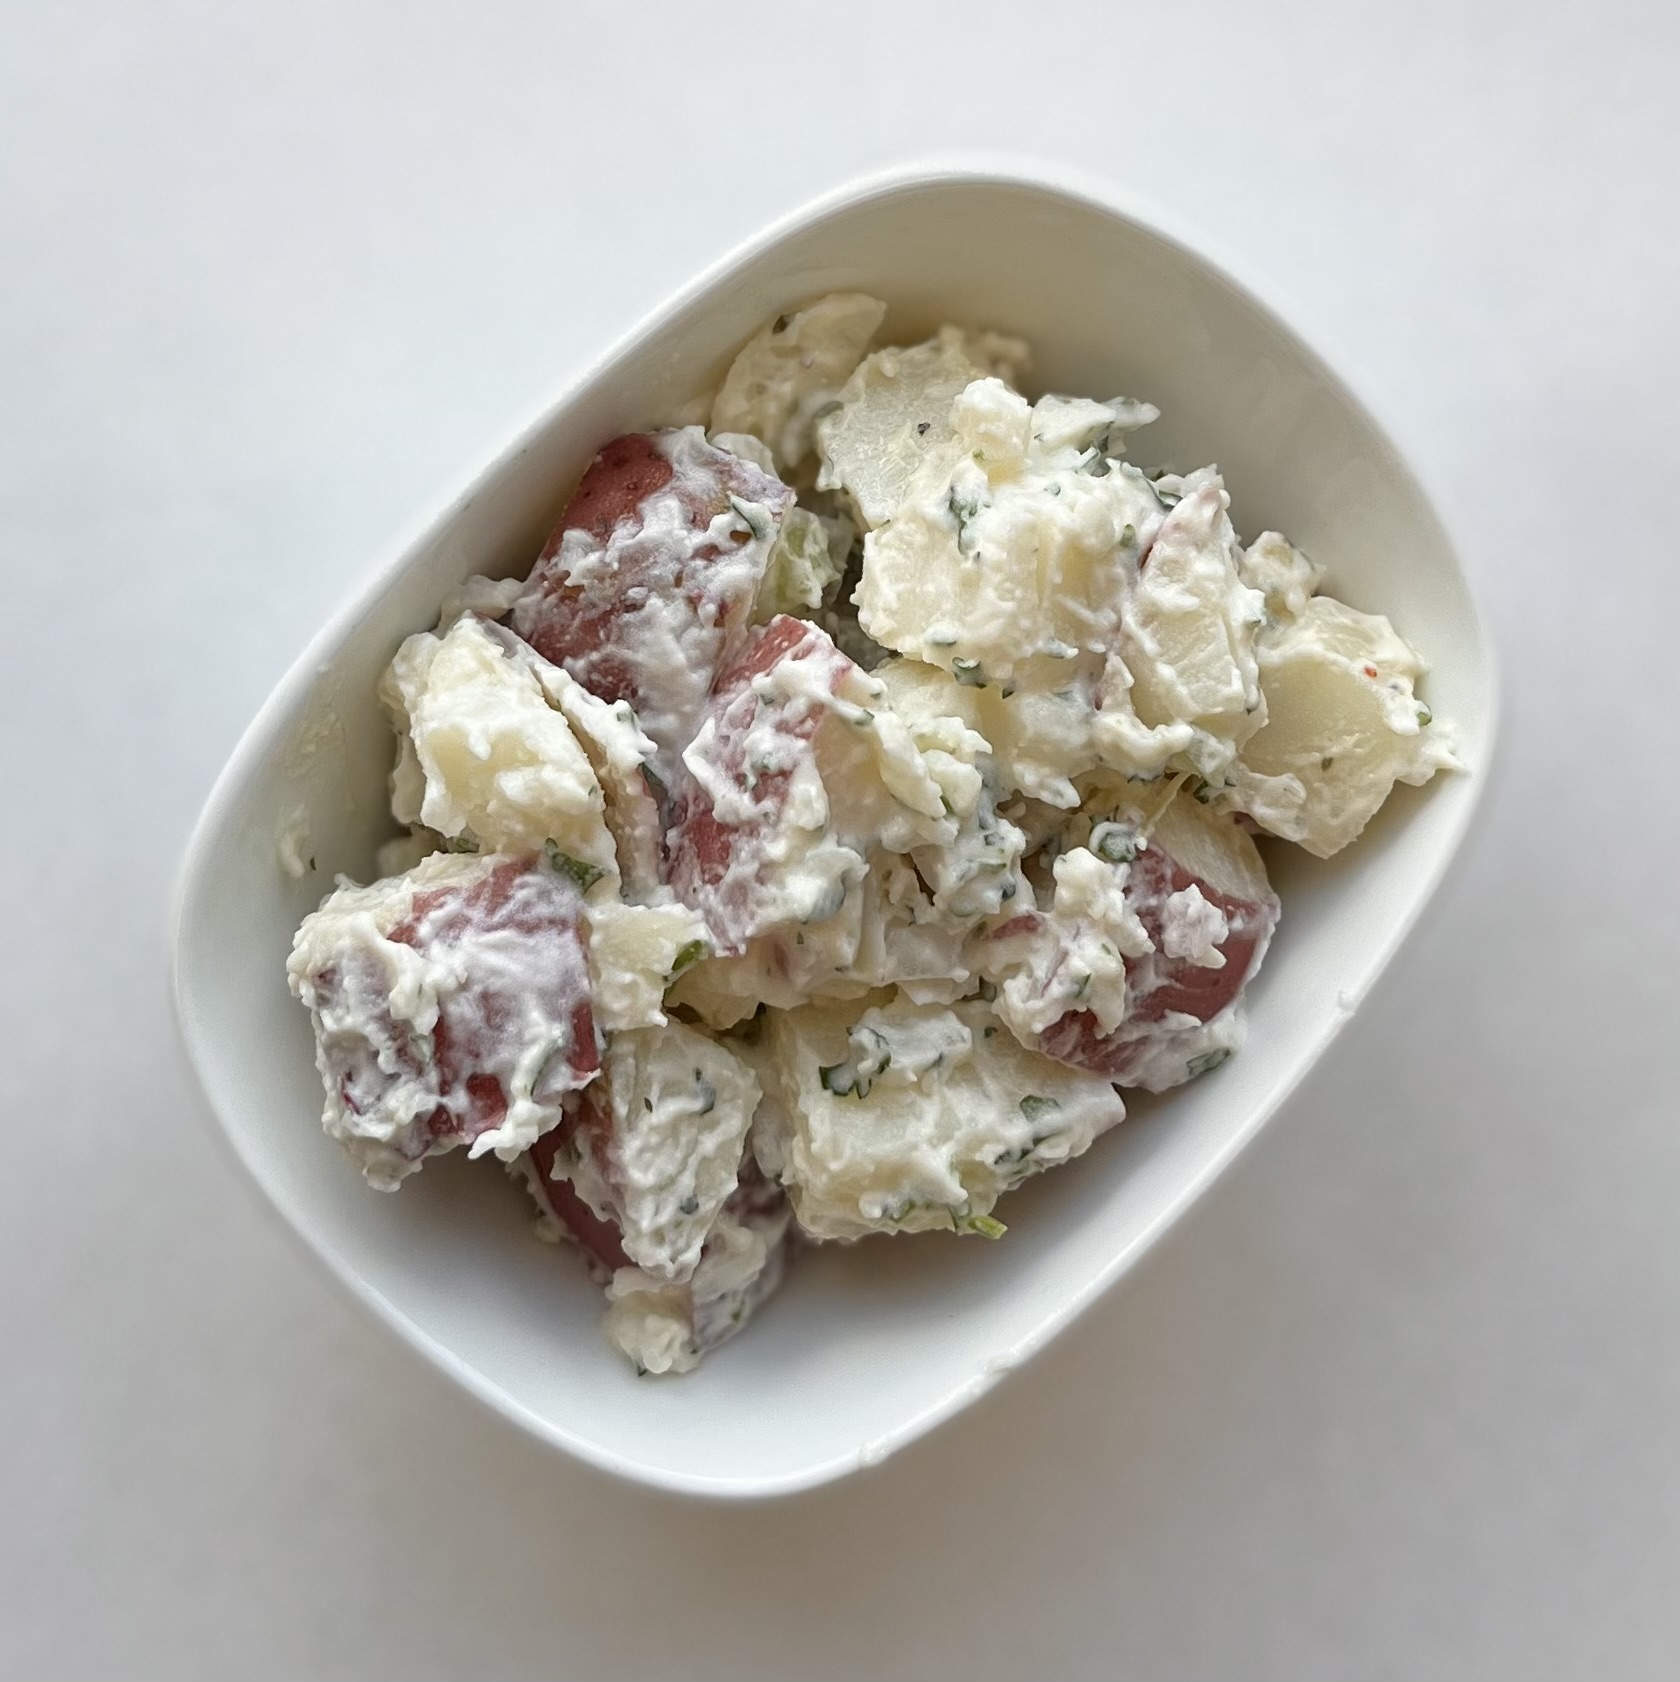 Refreshing Avon Prime Meats potato salad, made by our chefs with fresh ingredients.